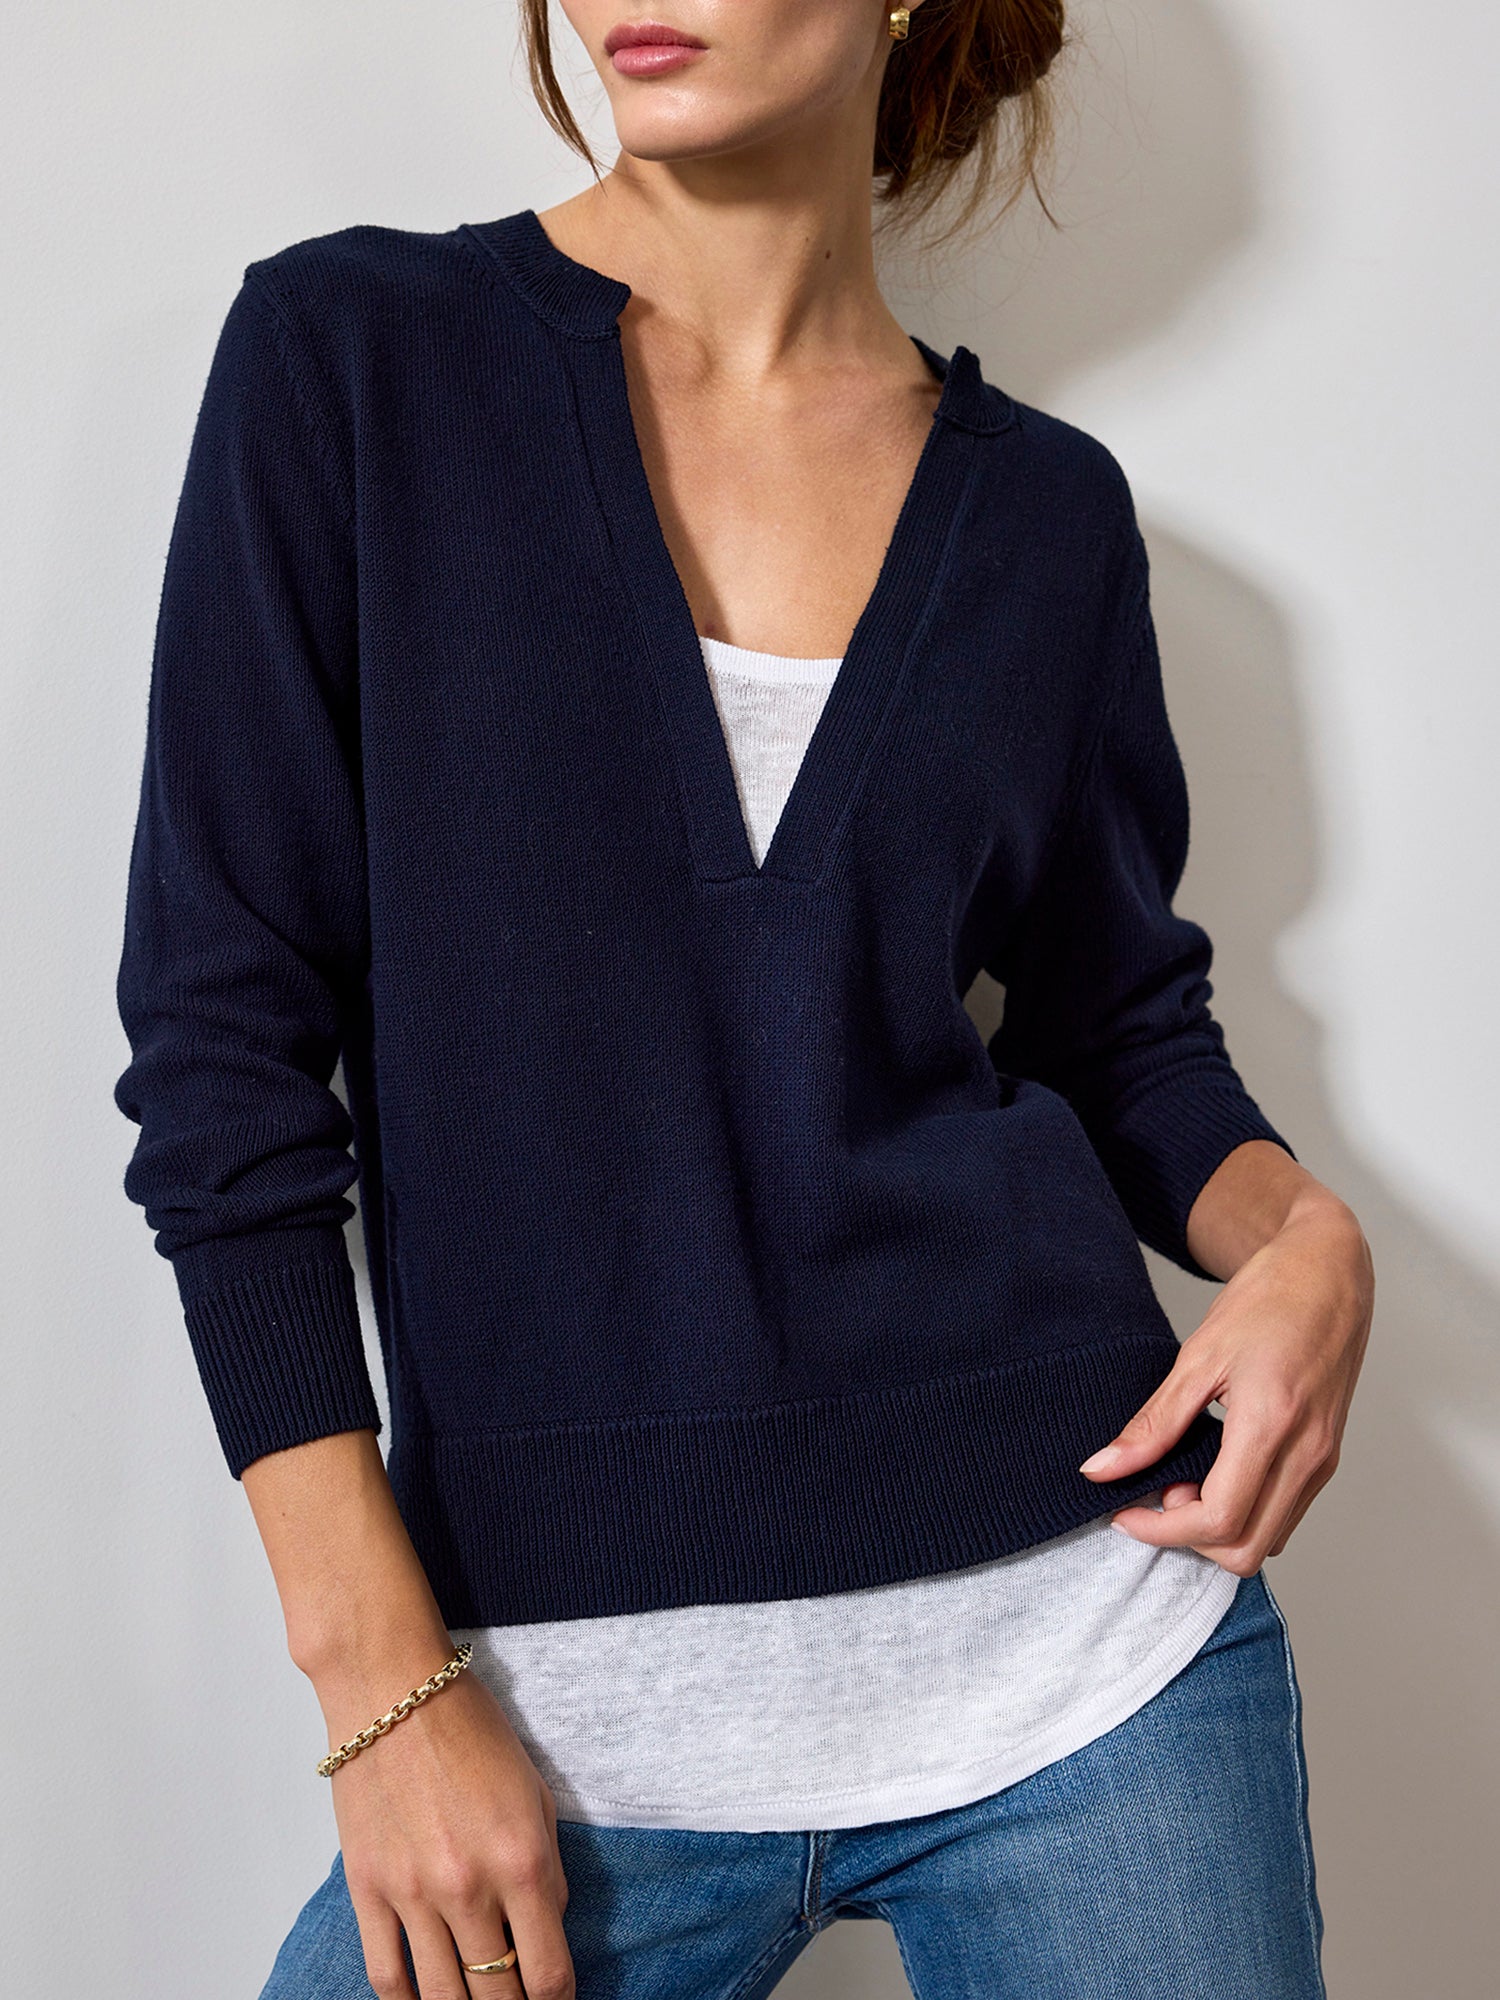 Roan navy layered henley sweater front view